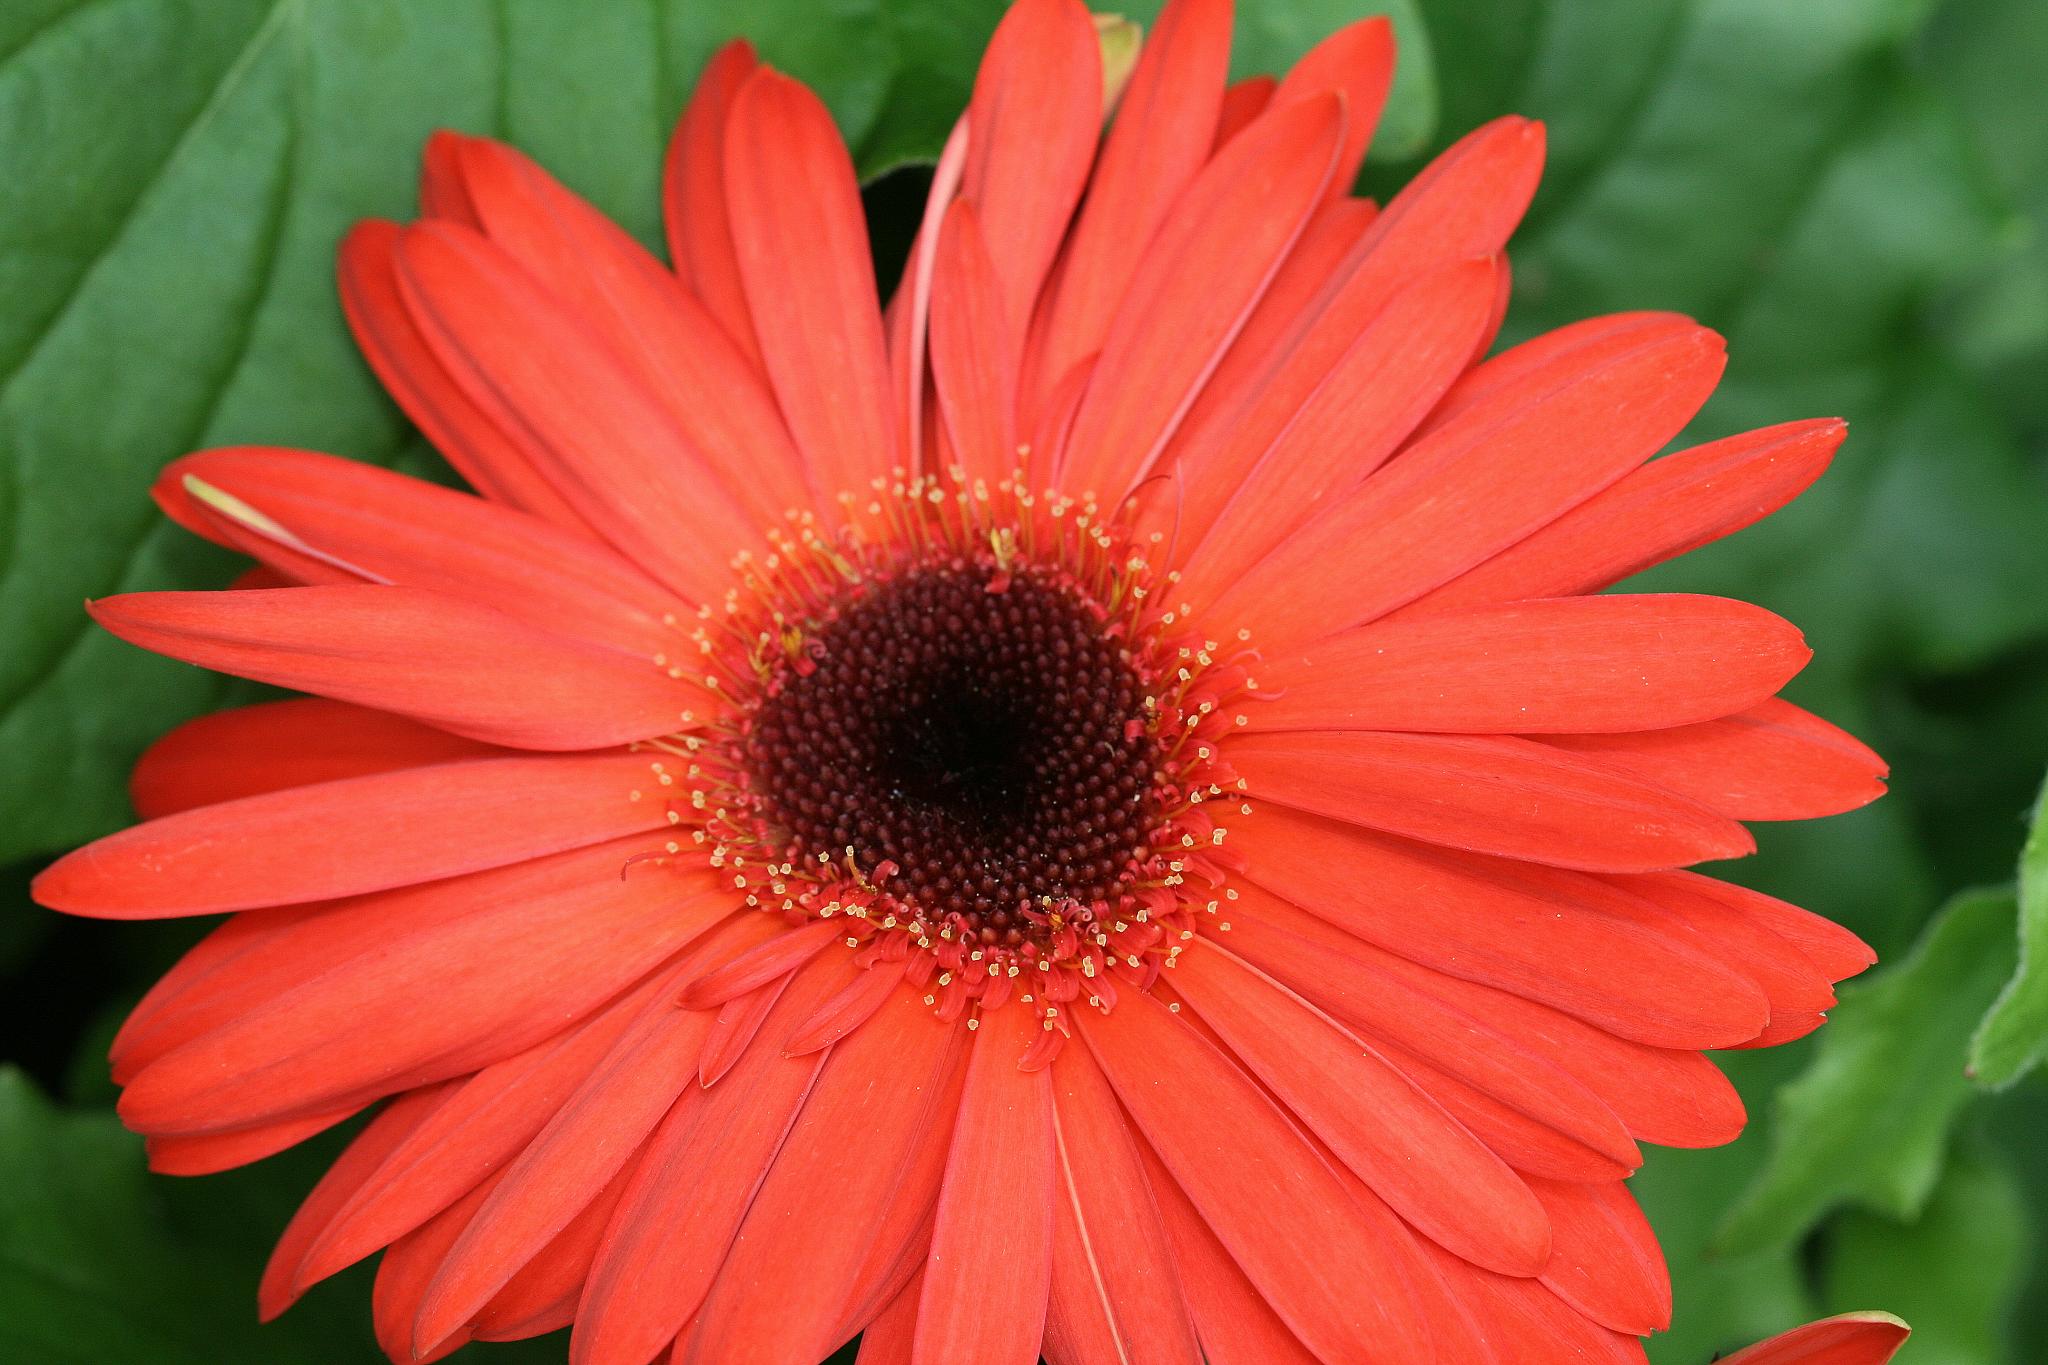 the small bright orange flower is surrounded by green leaves